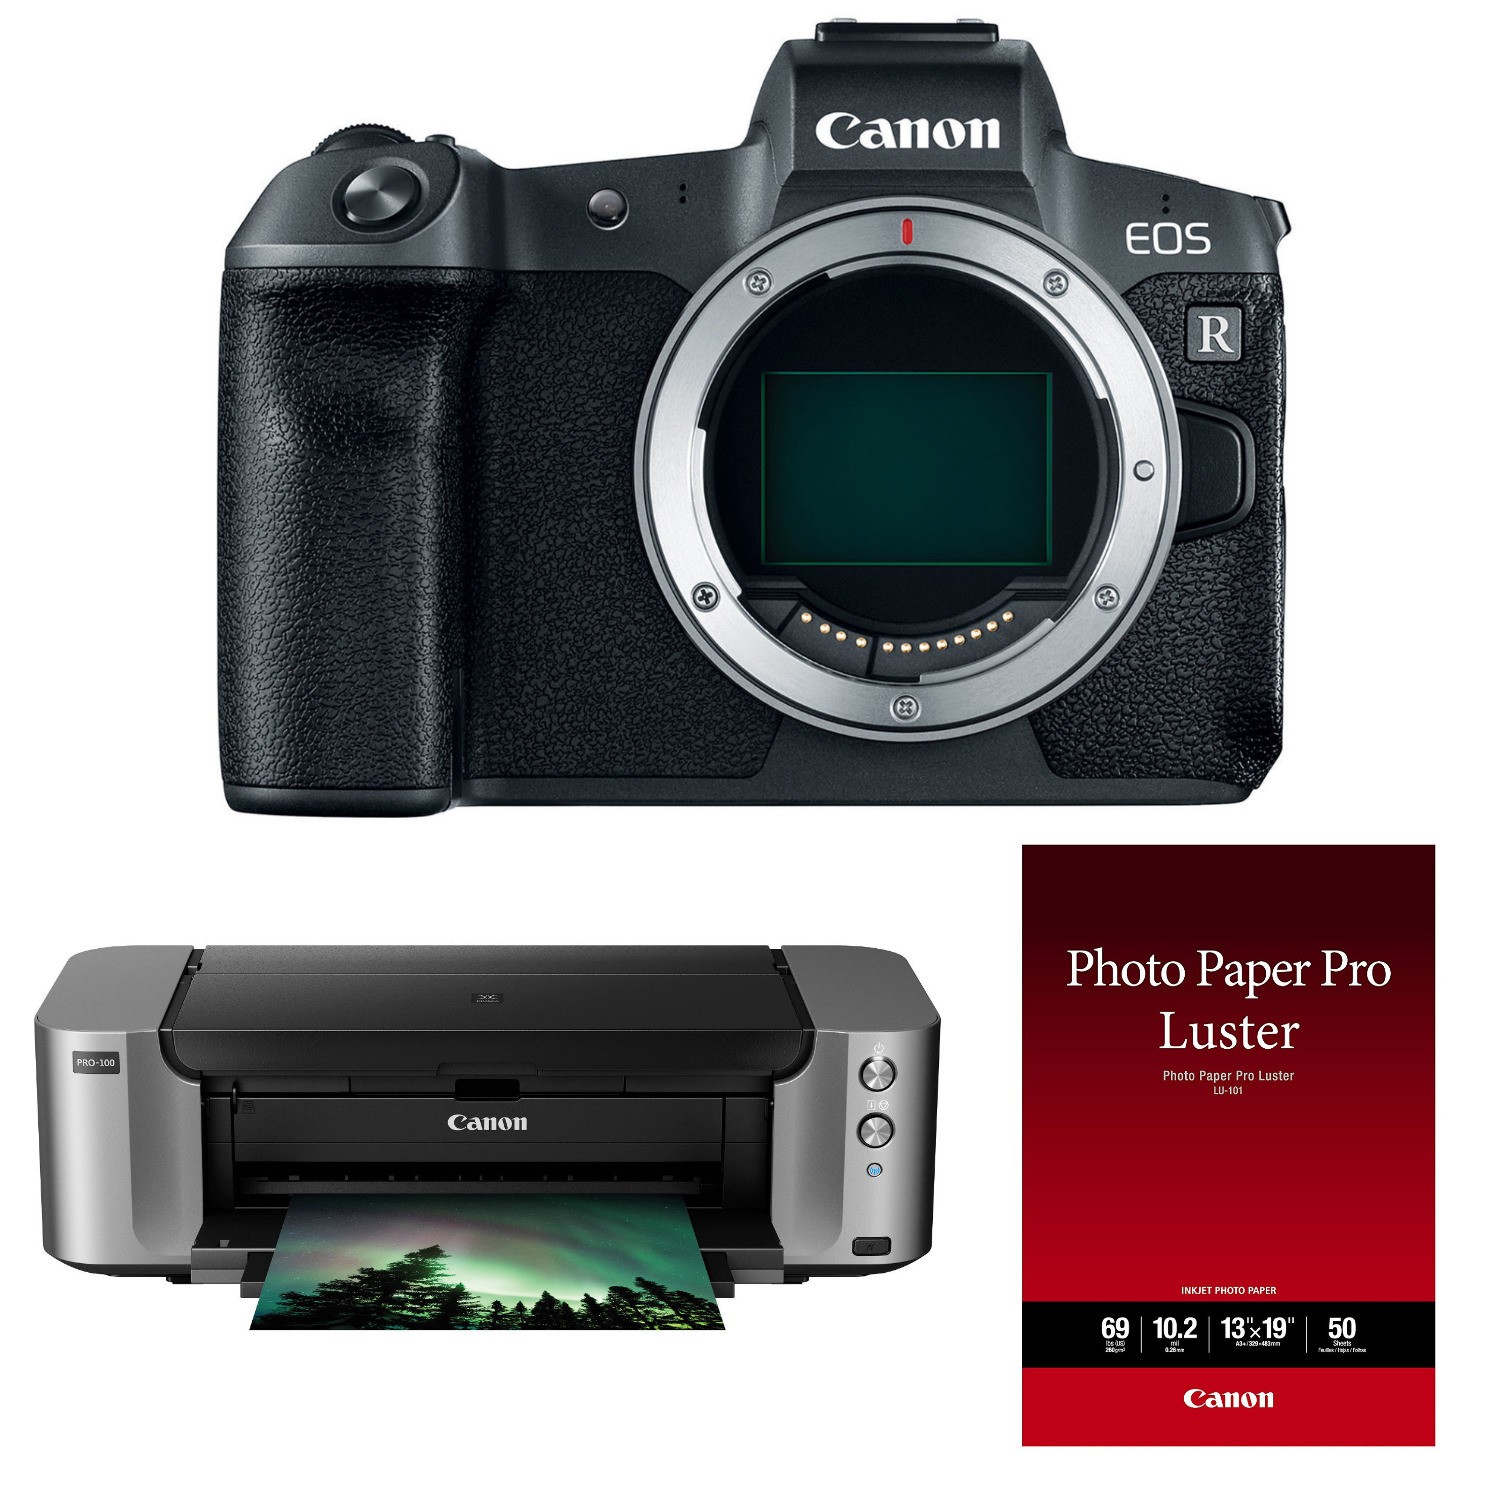 hot-deal-canon-eos-r-body-w-pixma-pro-100-printer-for-2-299-after